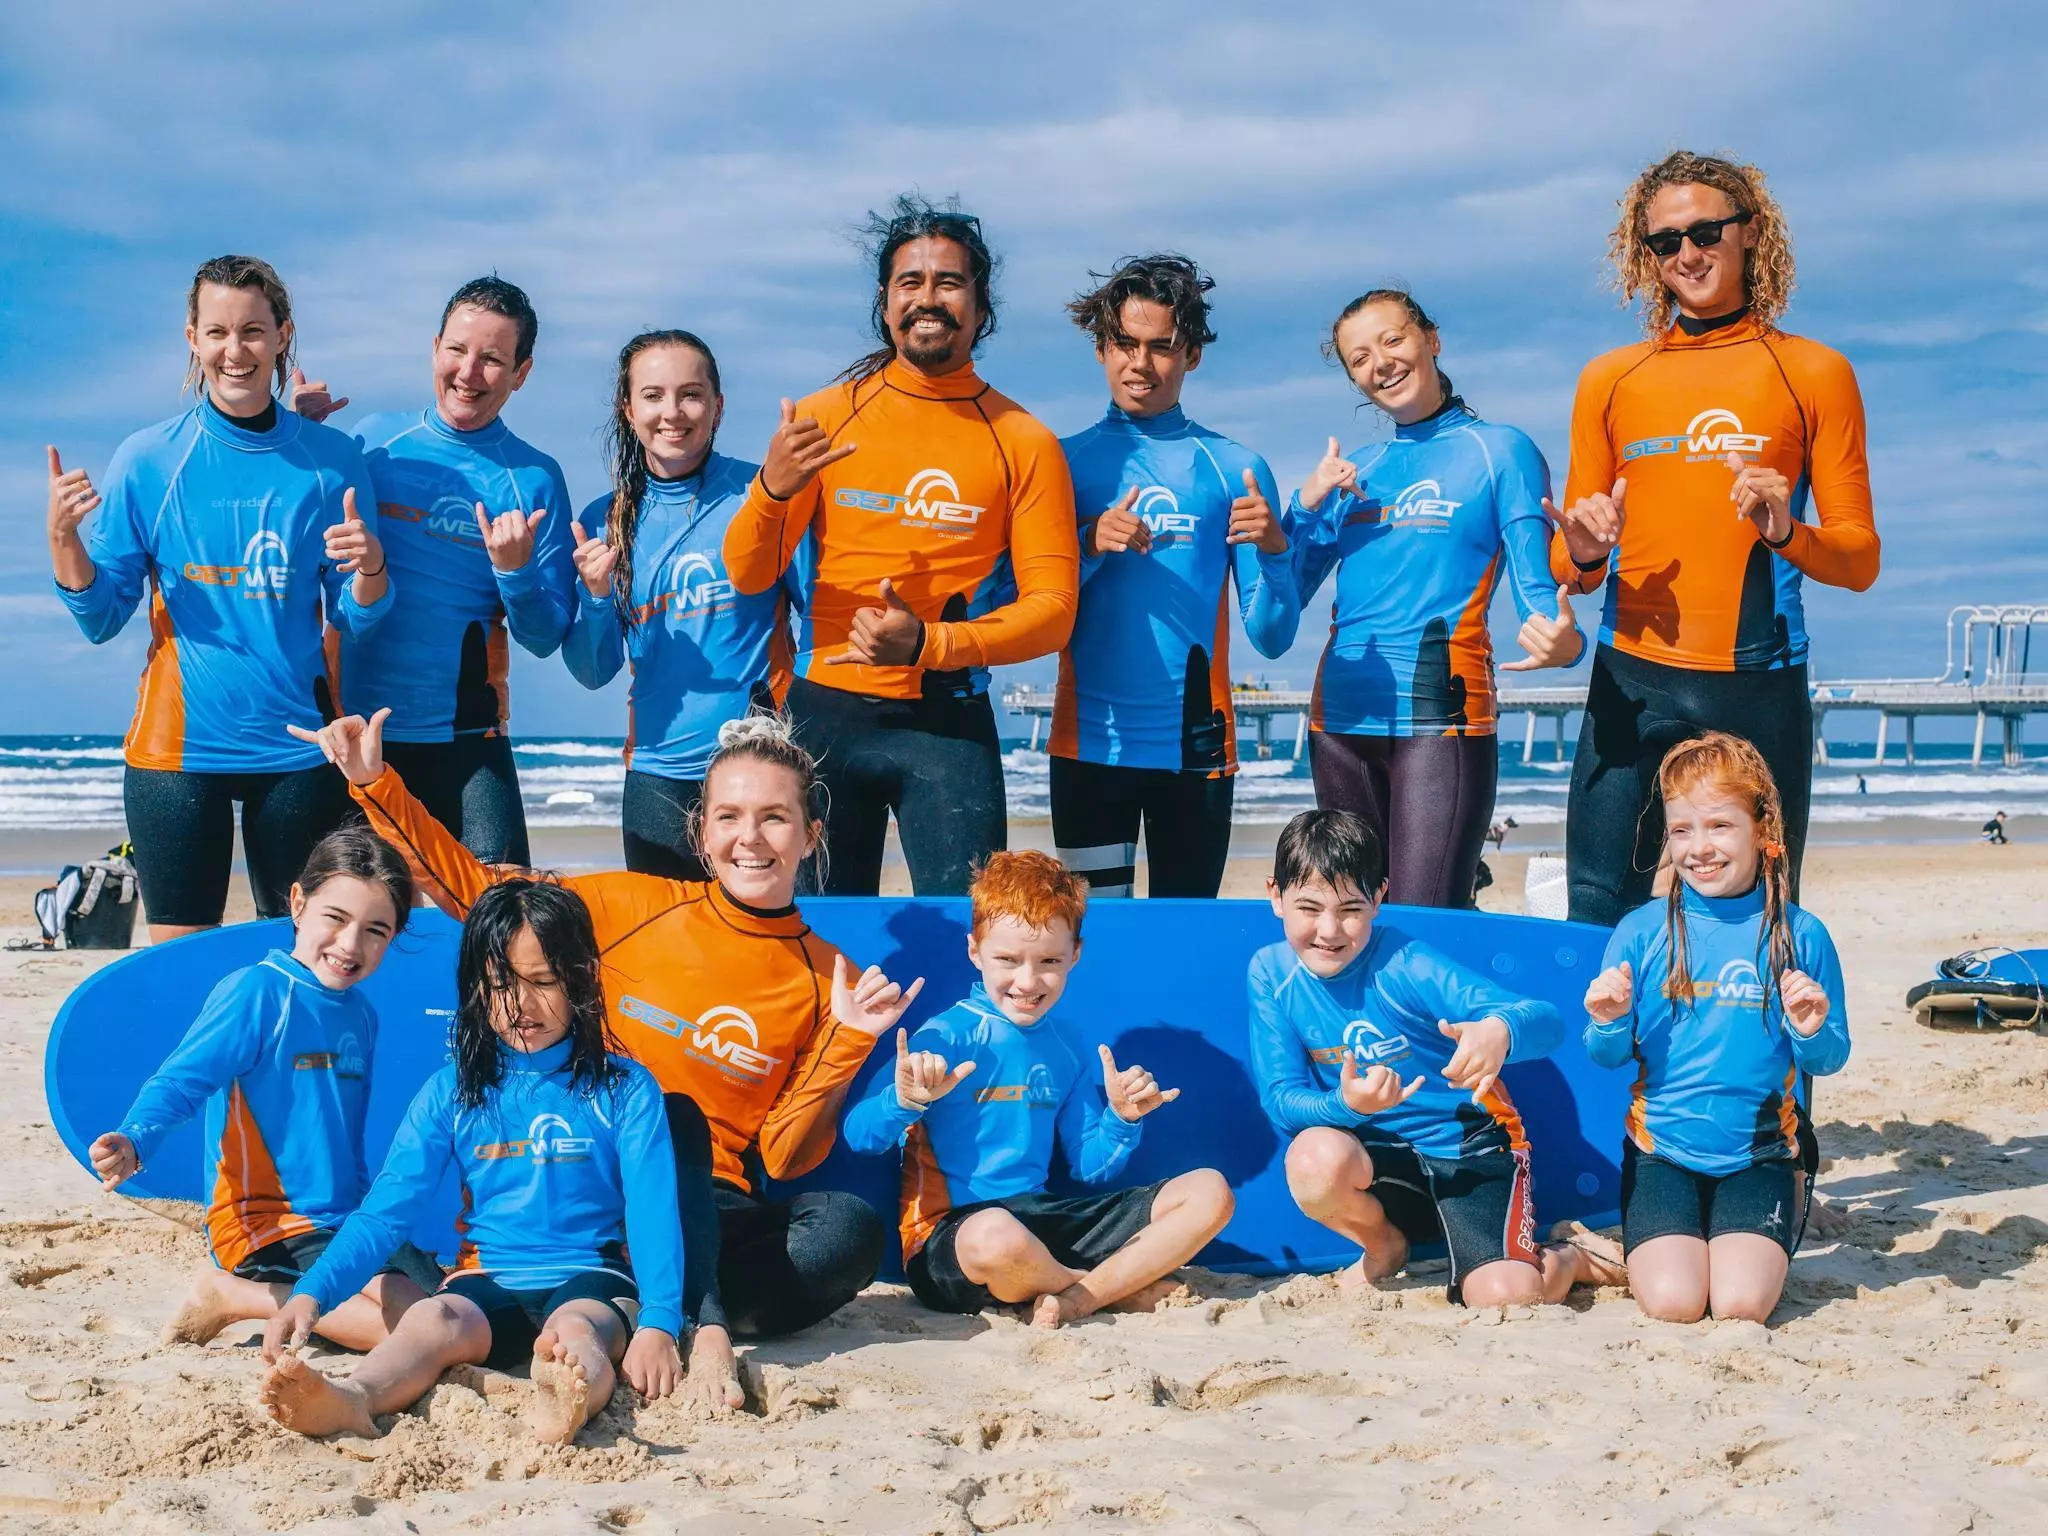 Book a Family Surf Lesson for 4, Kids Surf Half Price!